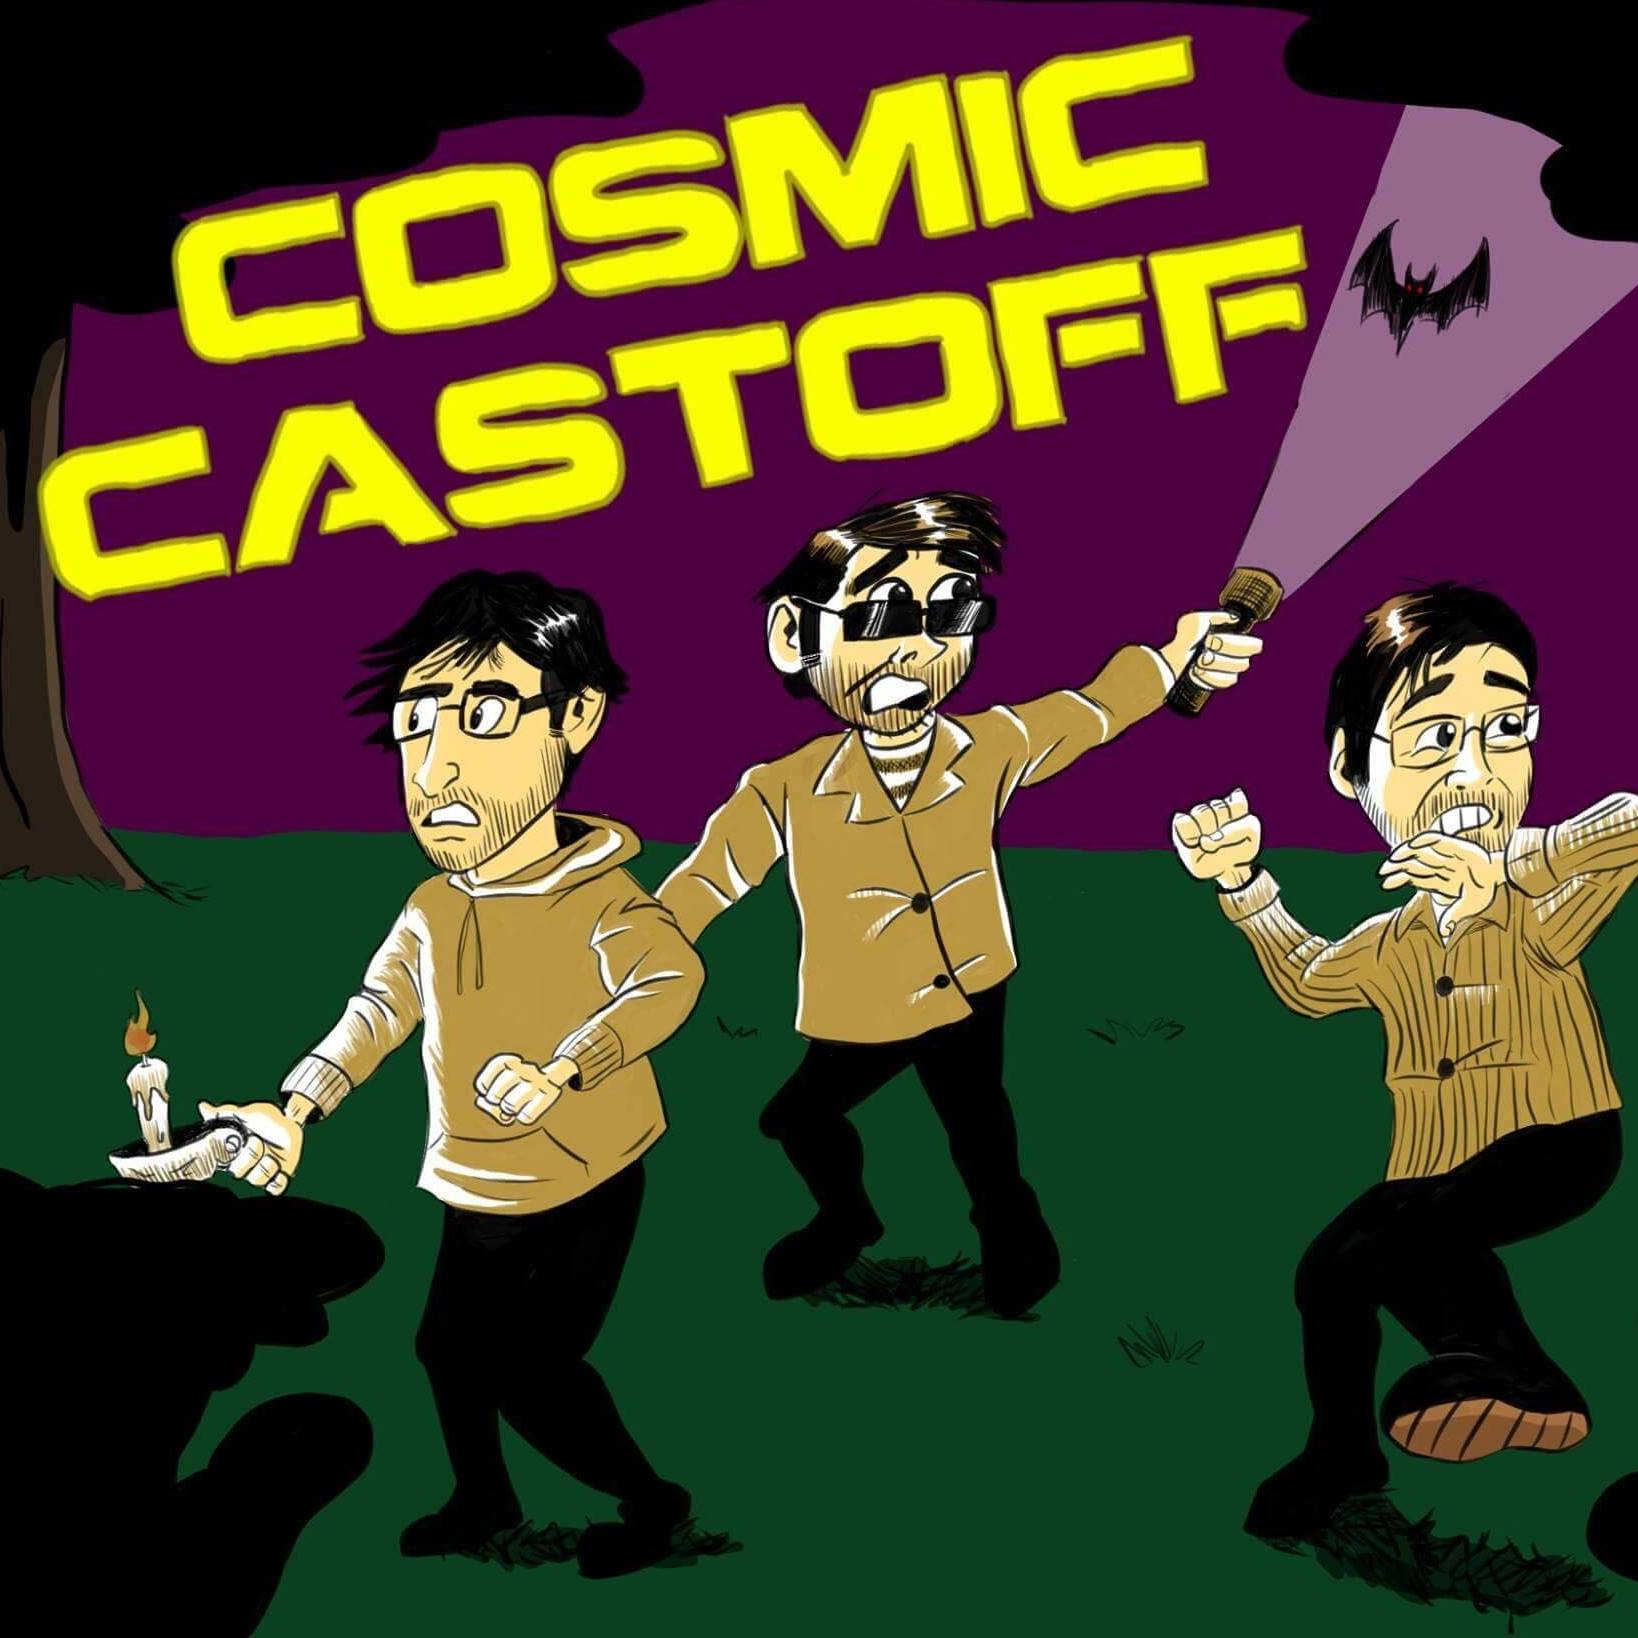 Cosmic Castoff: The Stench of Fortea